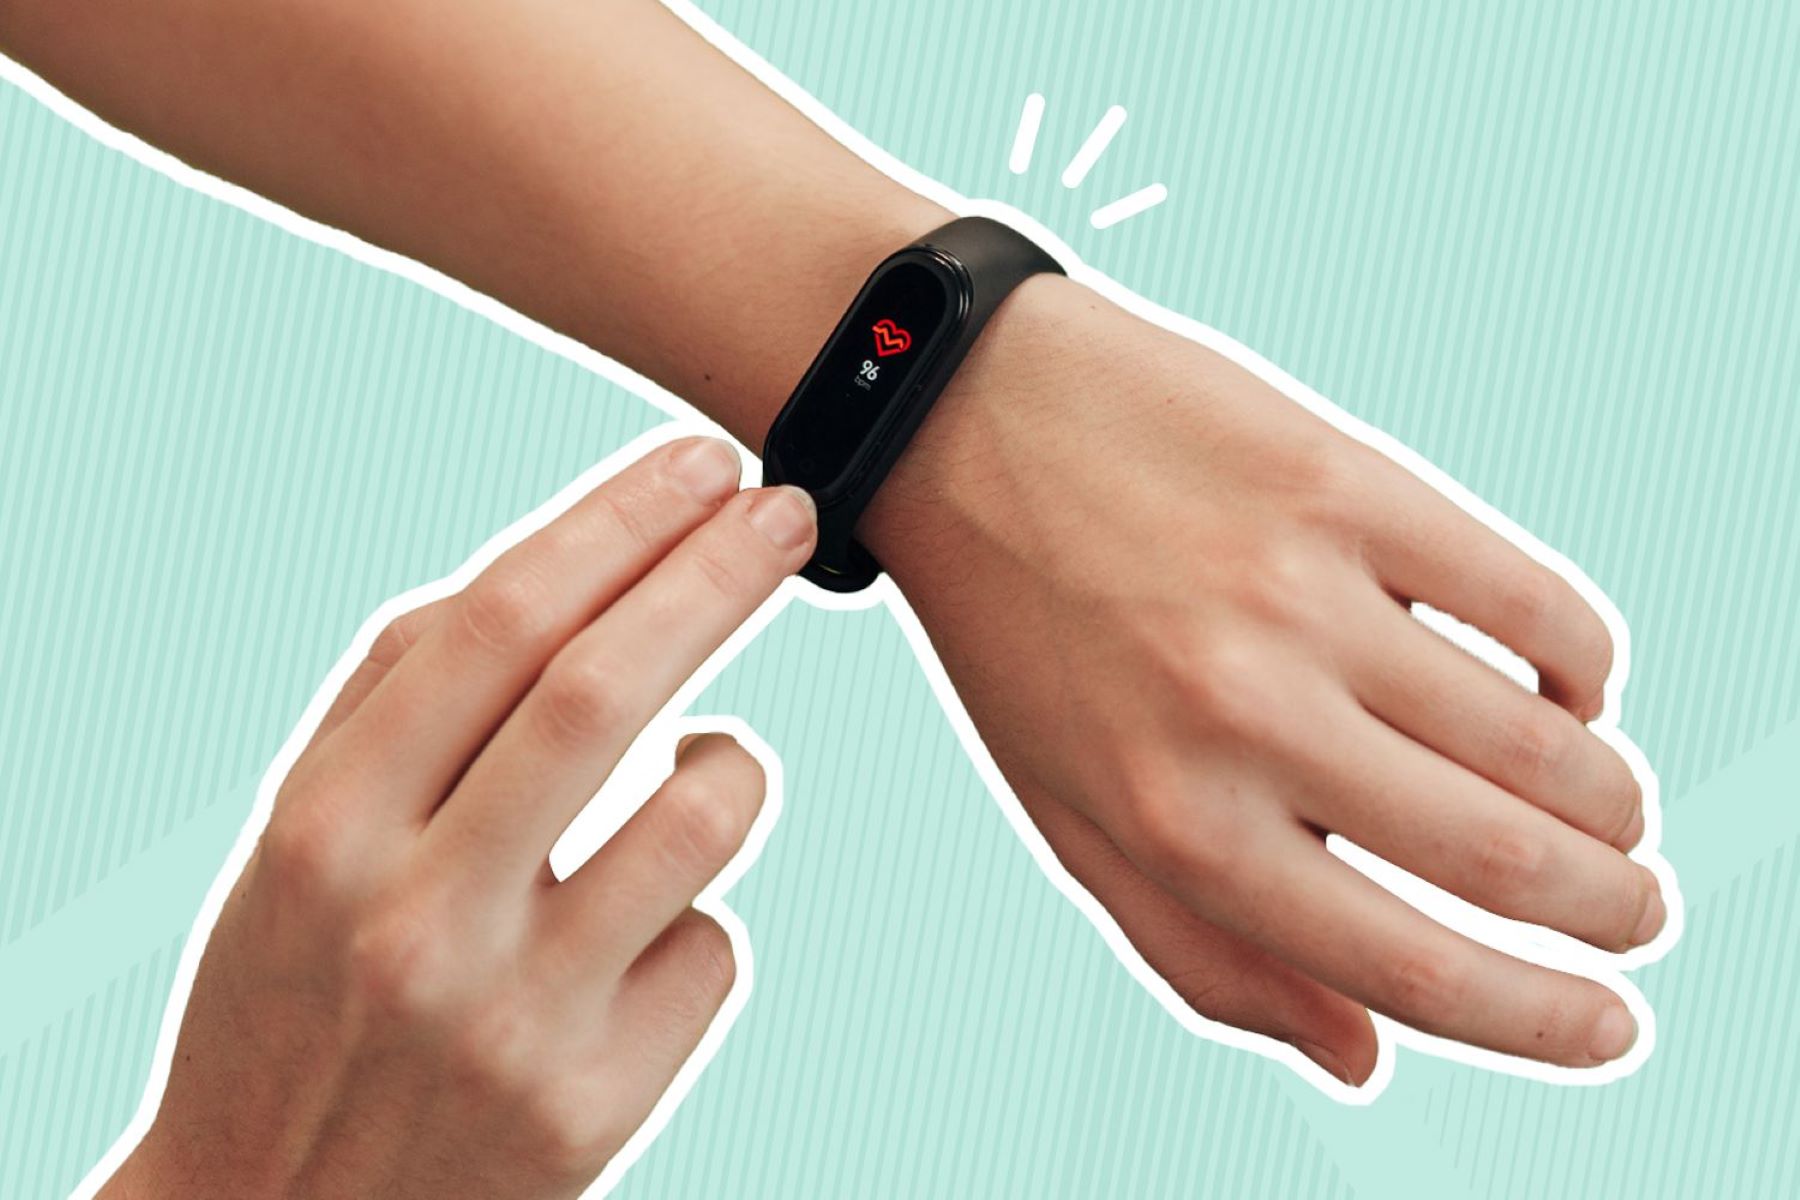 How To Use Heart Rate Fitness Tracker Watch